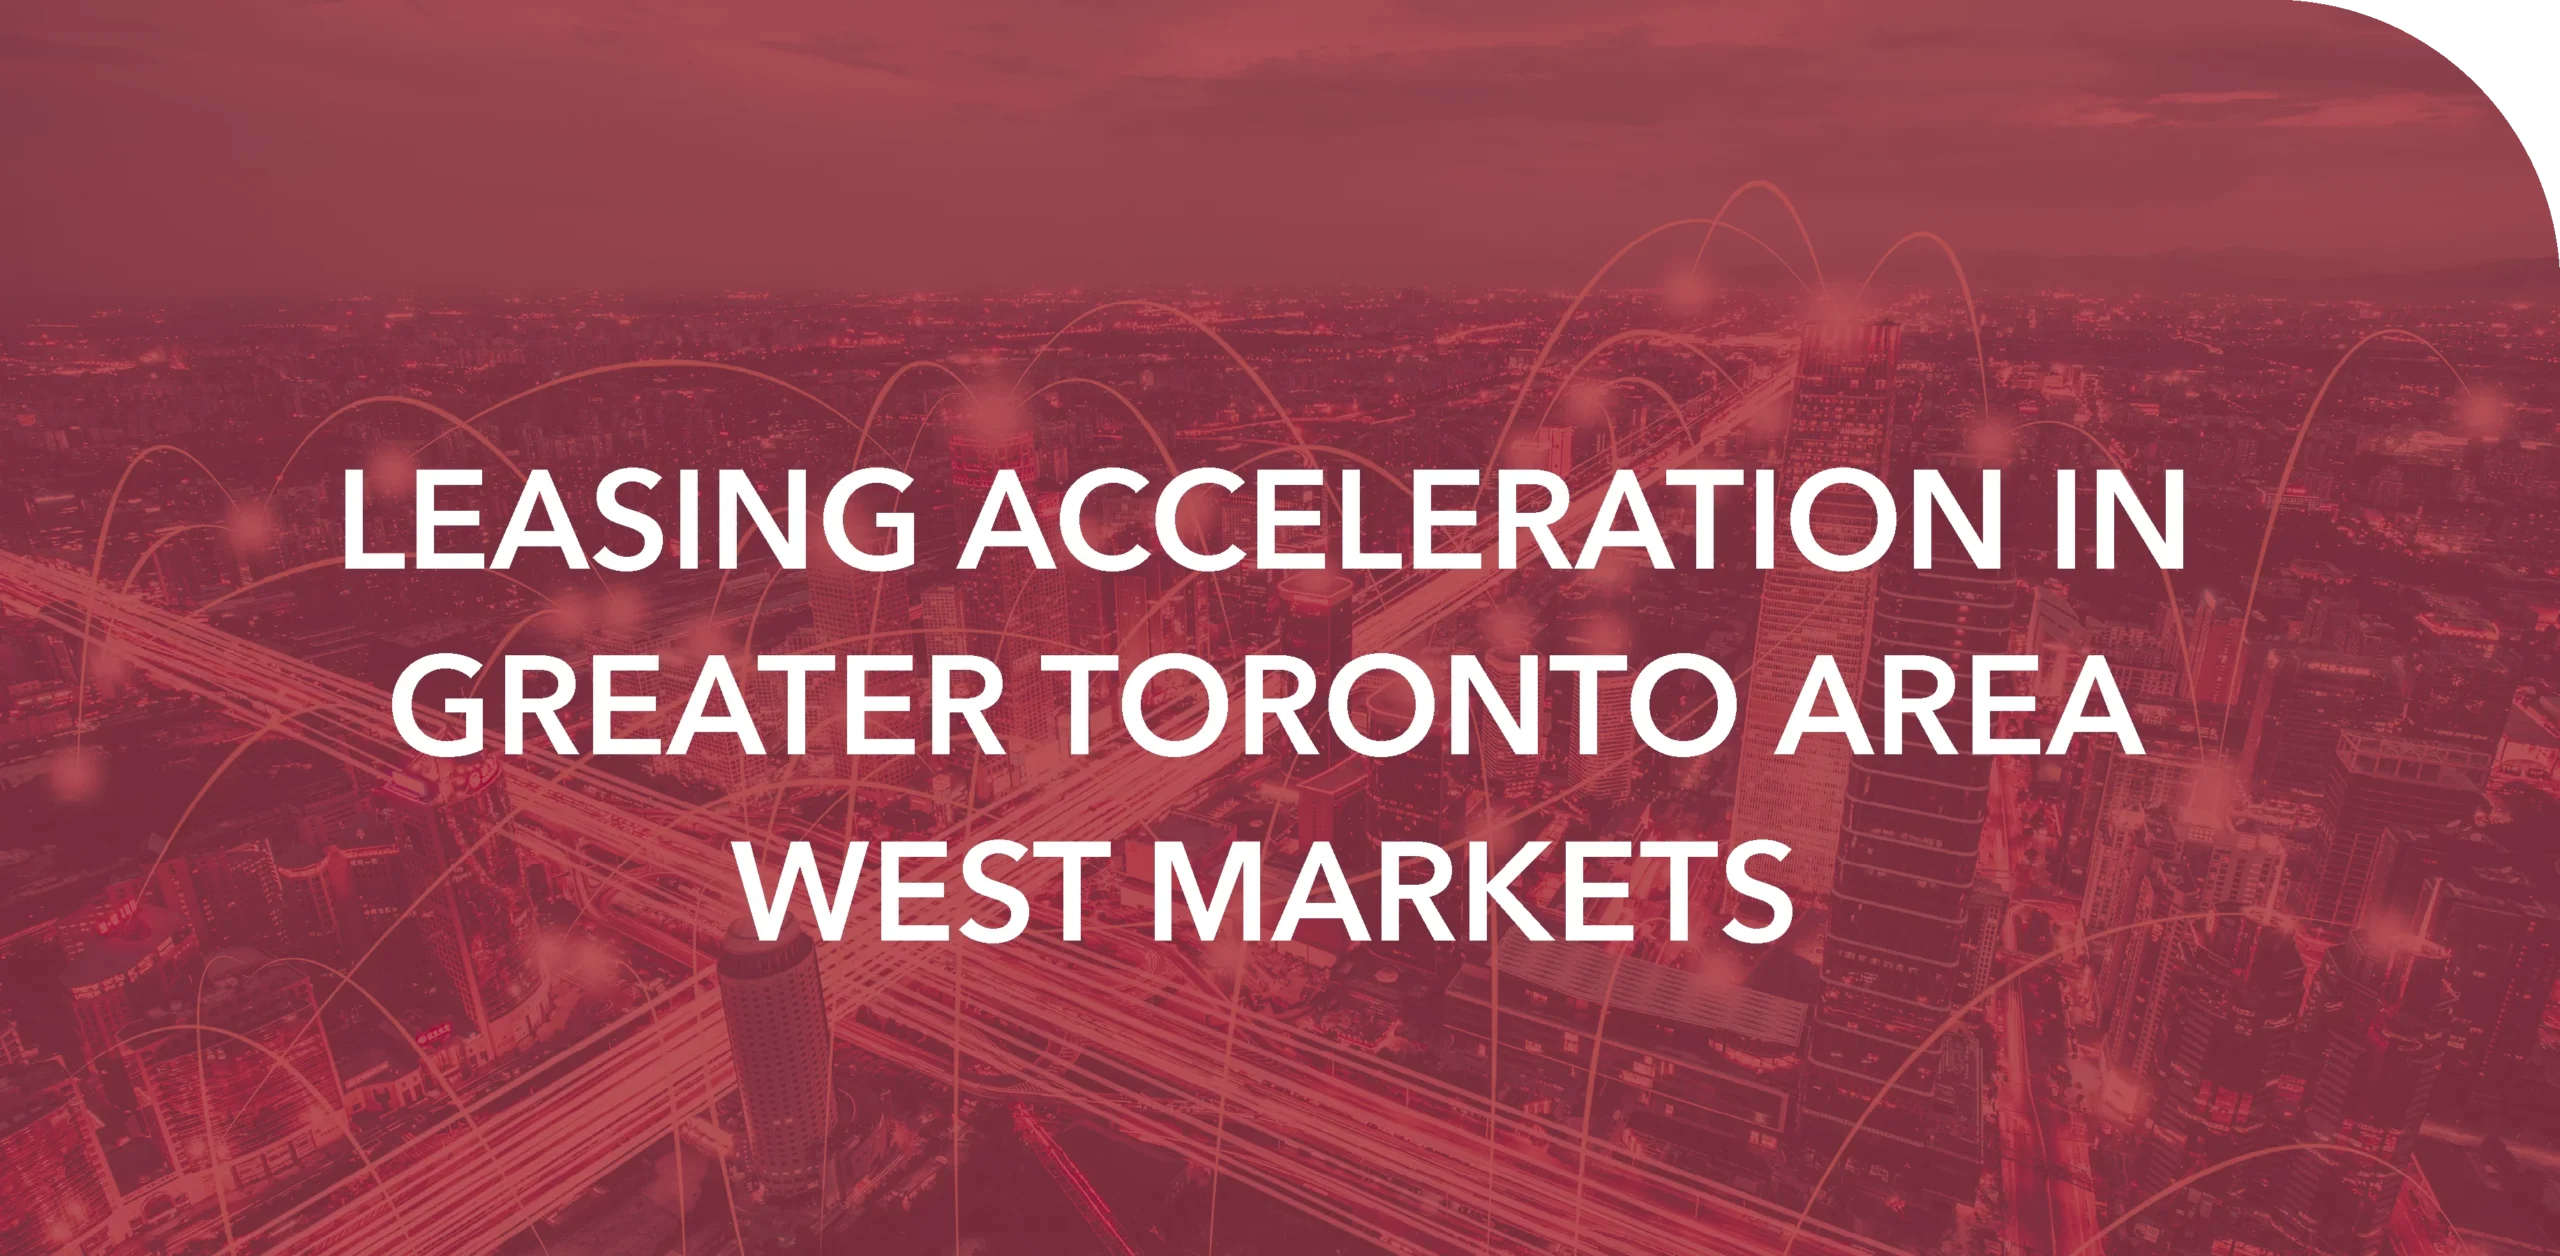 LEASING ACCELERATION IN GREATER TORONTO AREA WEST MARKETS